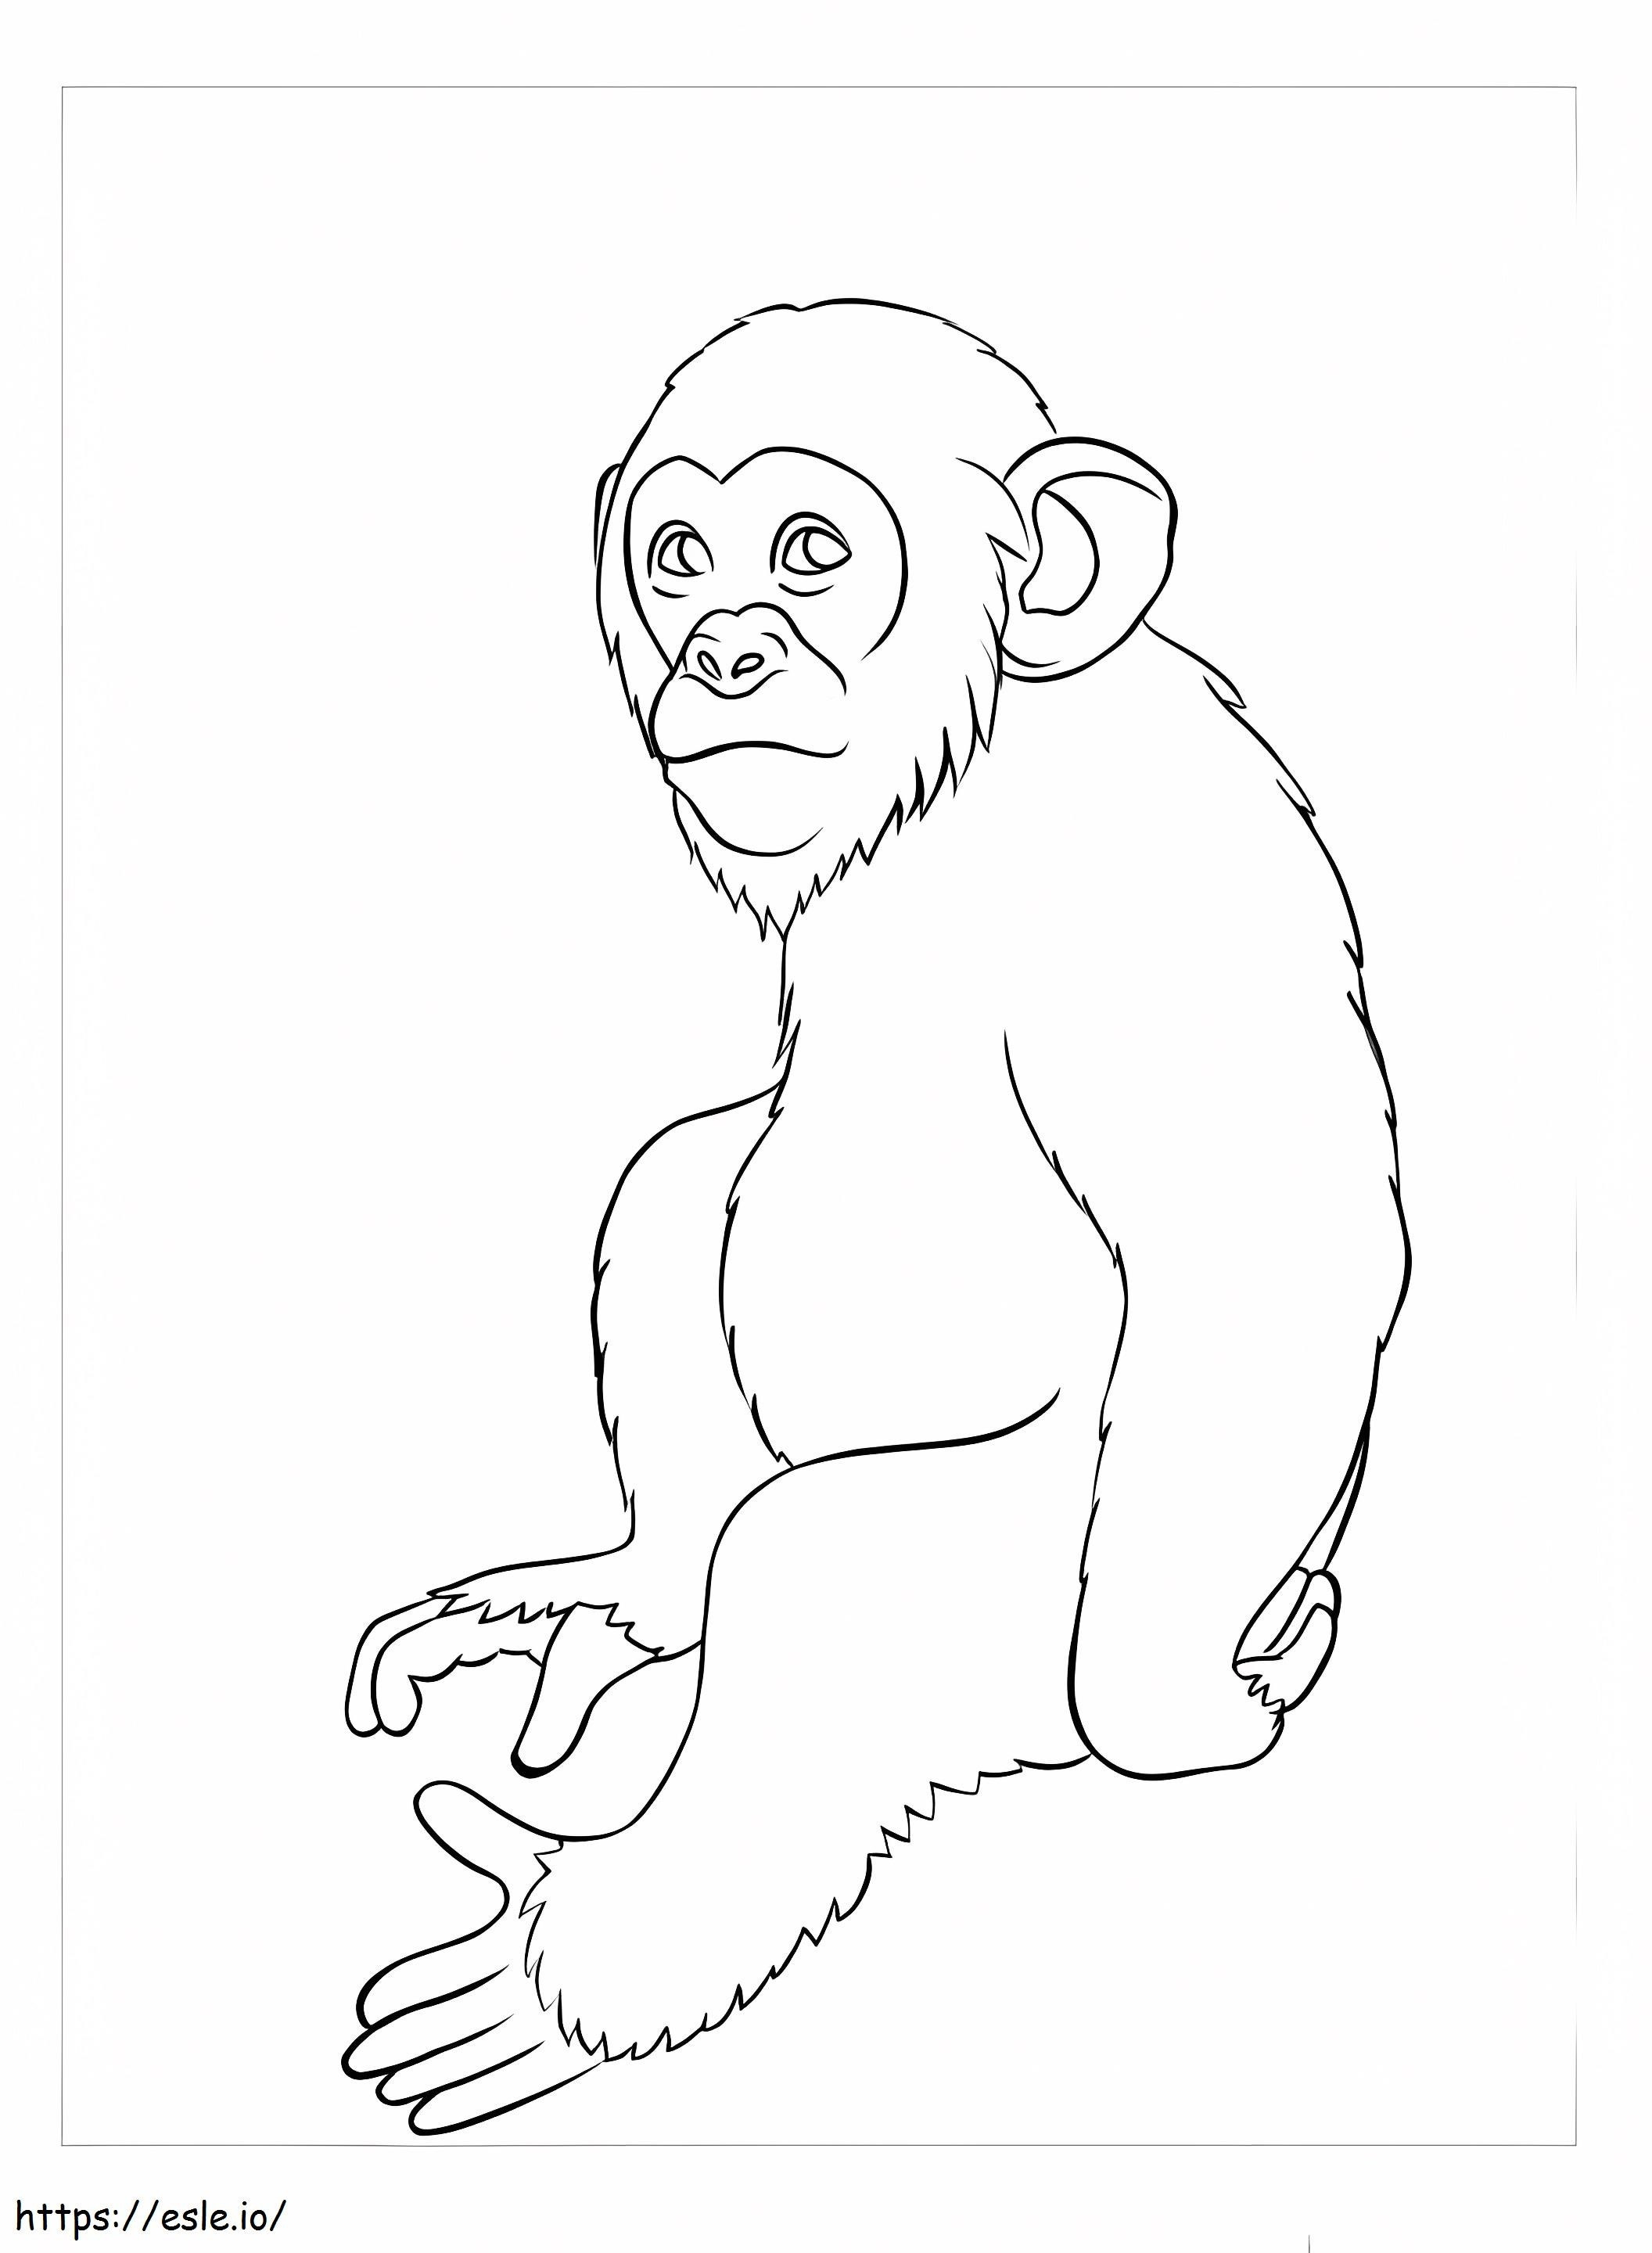 Awesome Apes coloring page